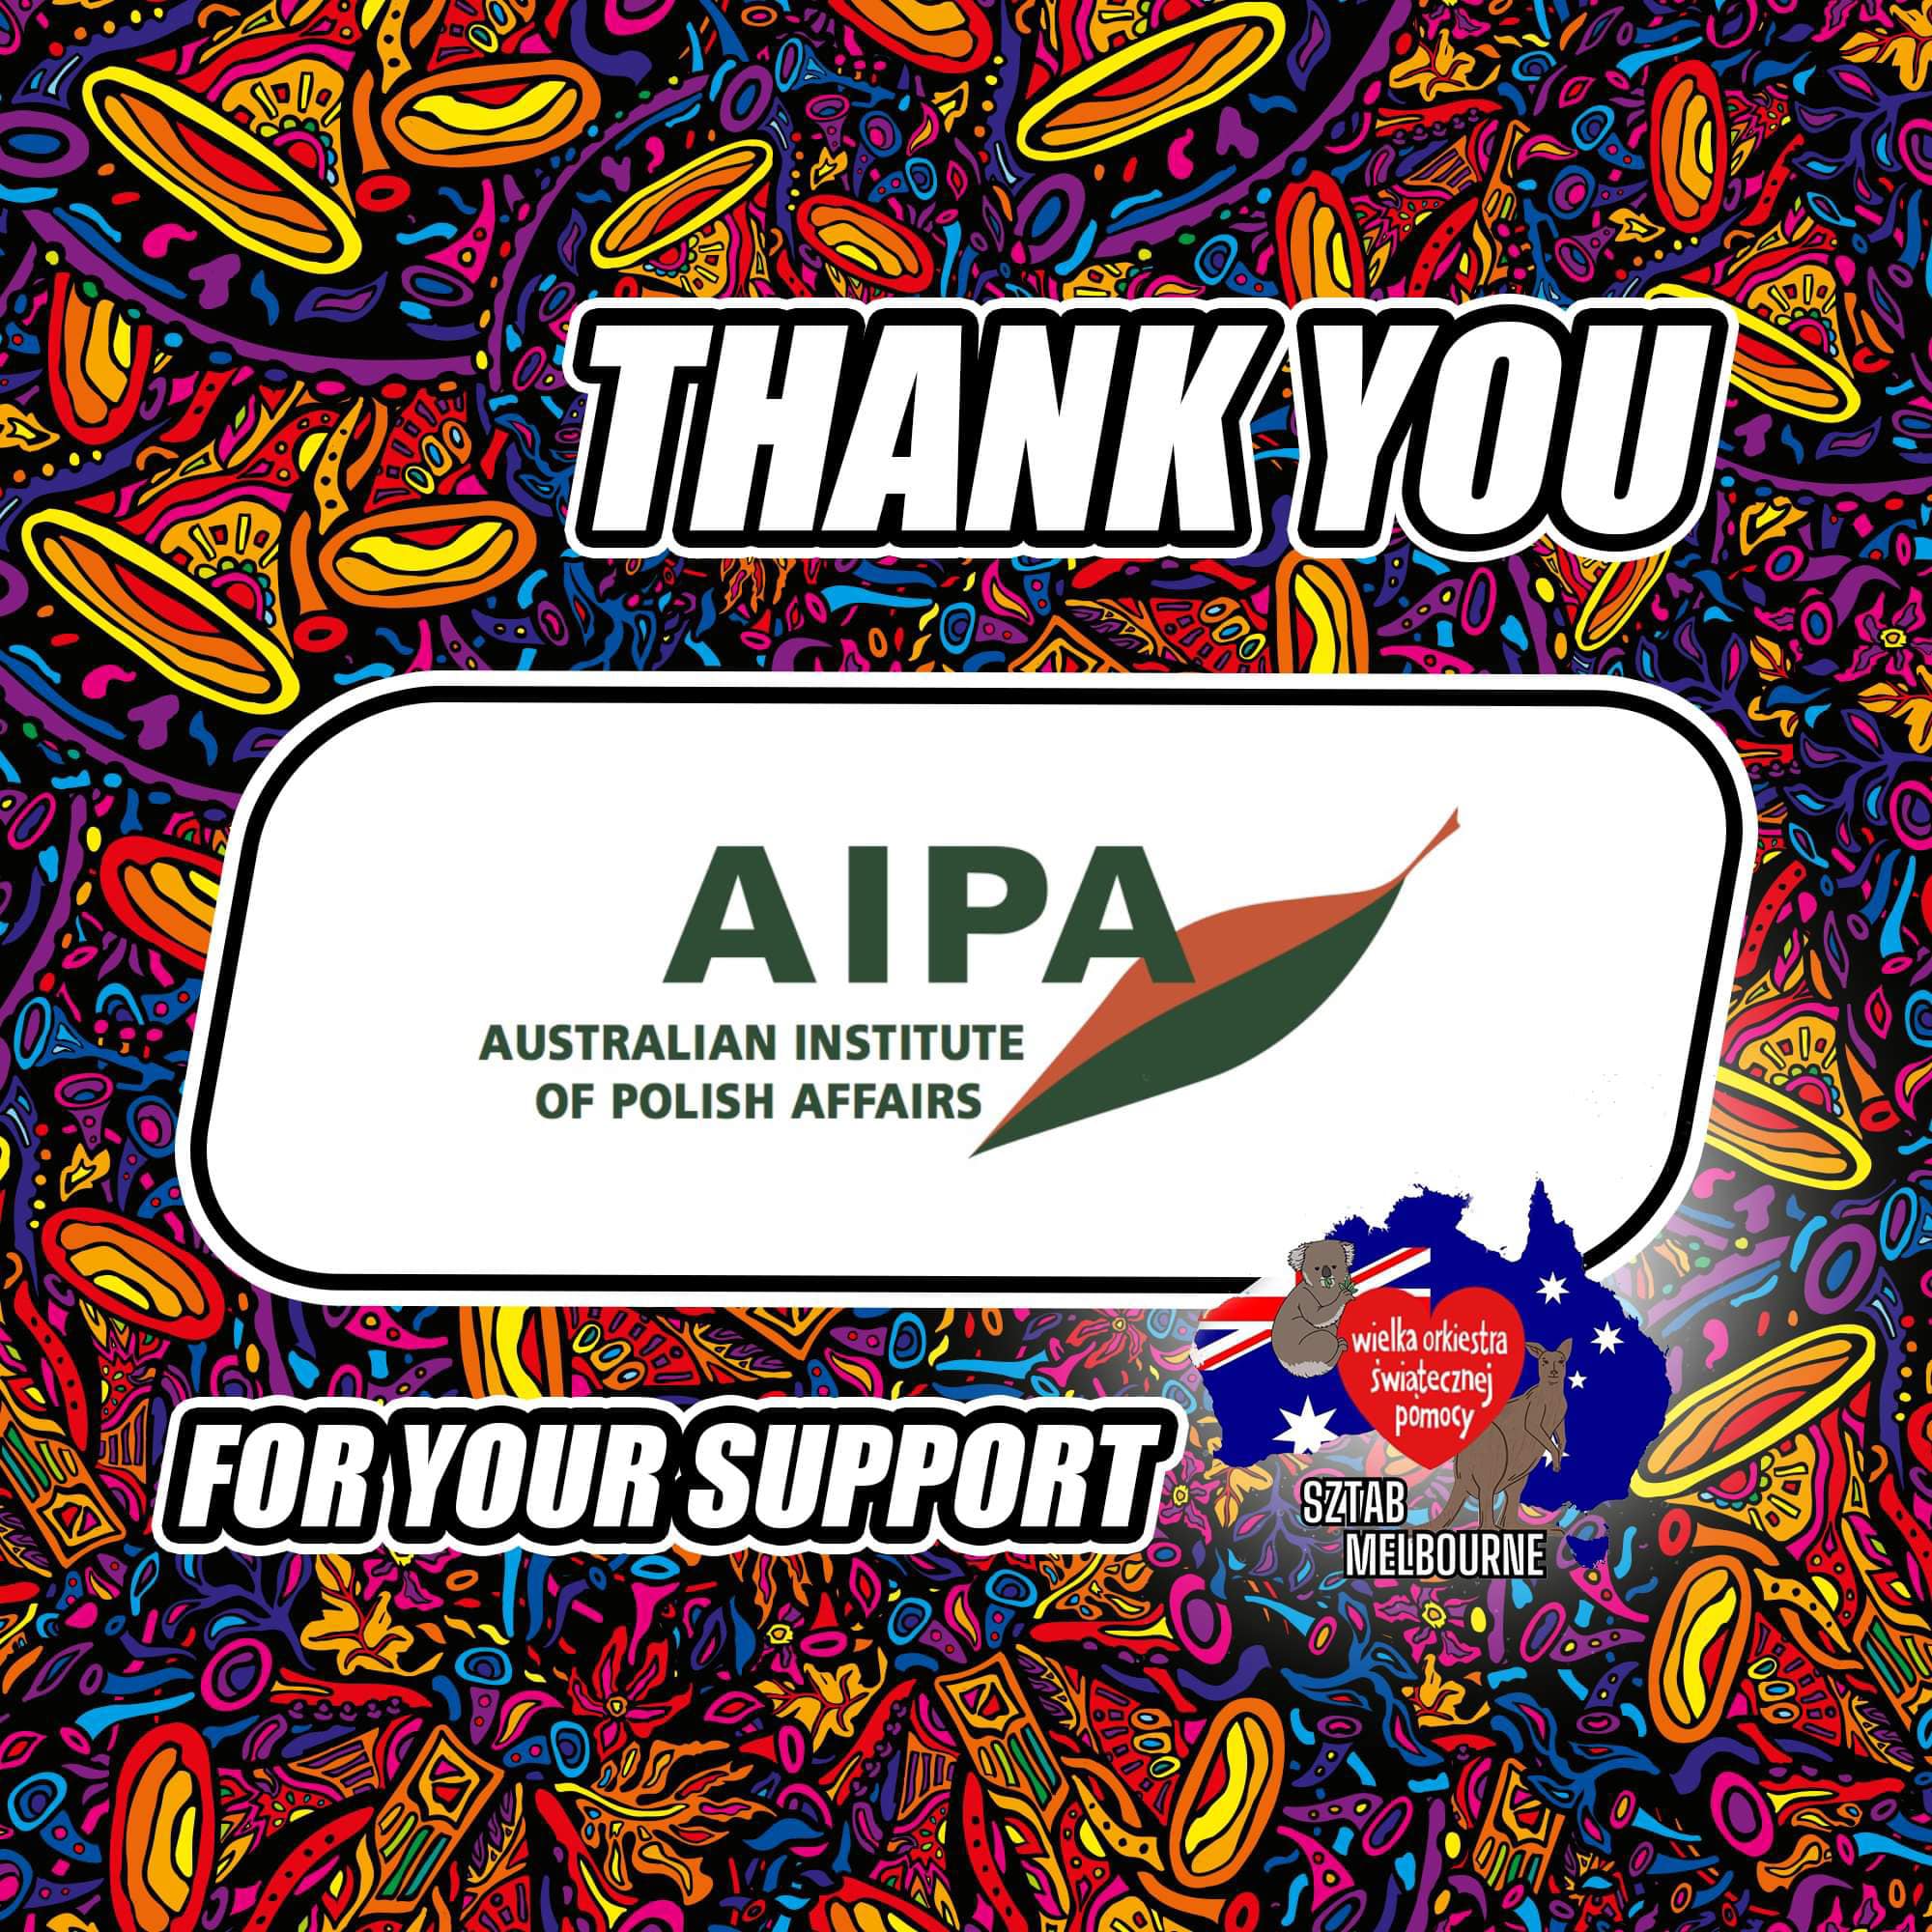 AIPA supports WOŚP Melbourne